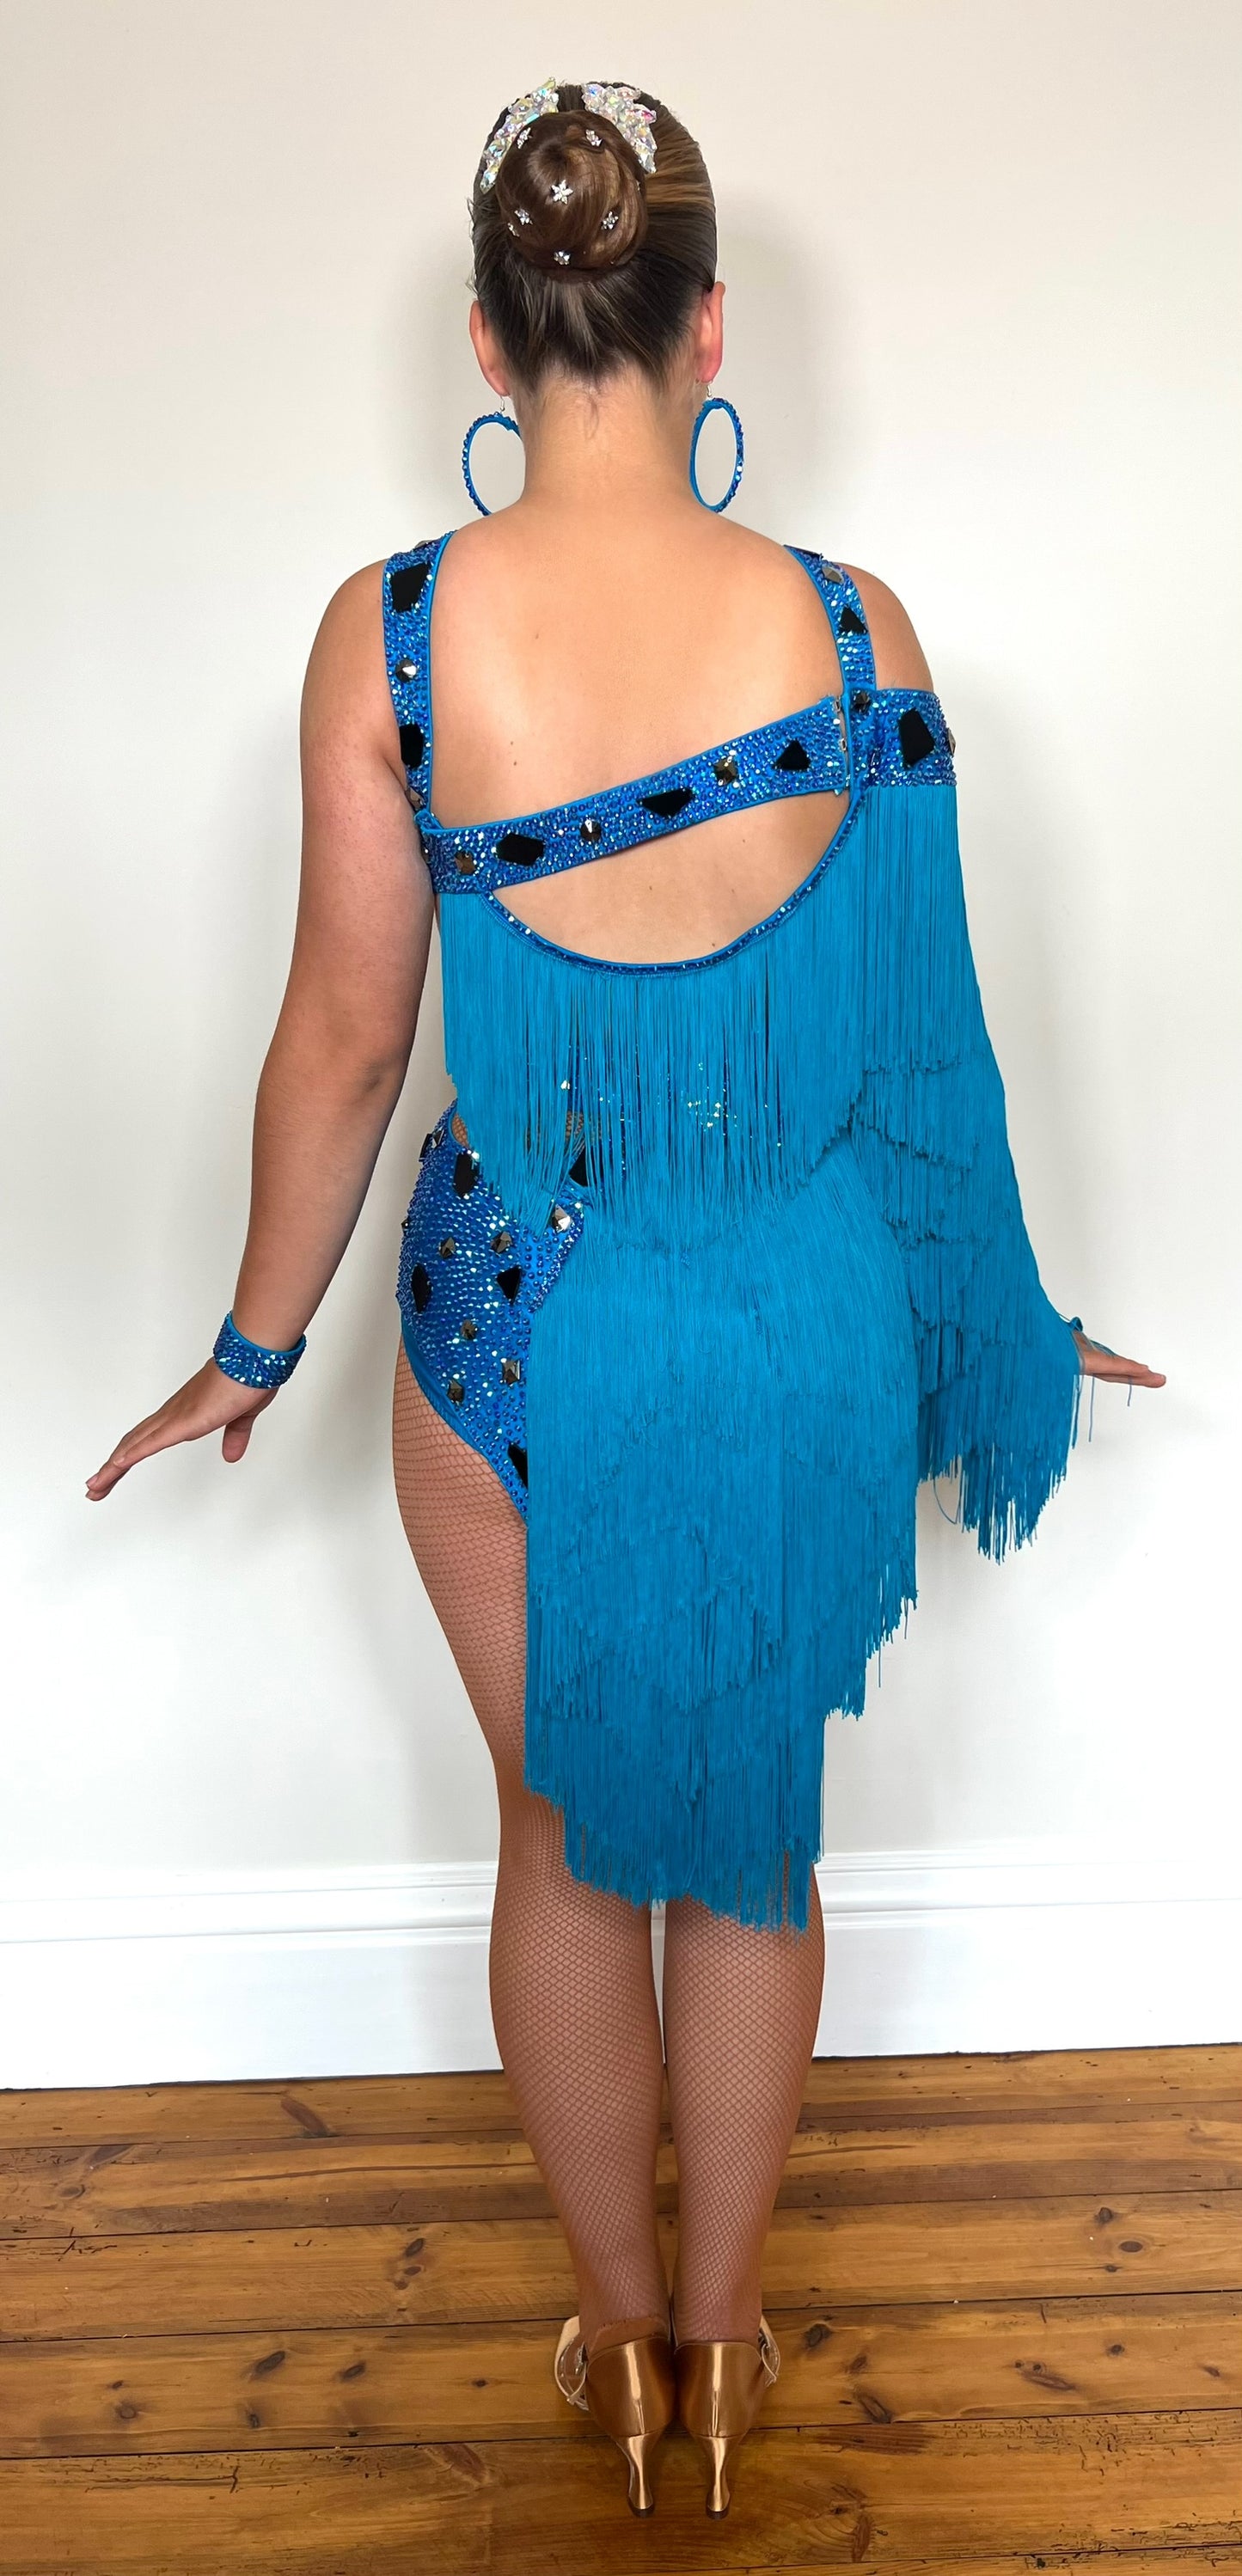 310 Statement Turquoise Latin Dress. Fringed one arm dress with strapping details decorated with Turquoise stones.